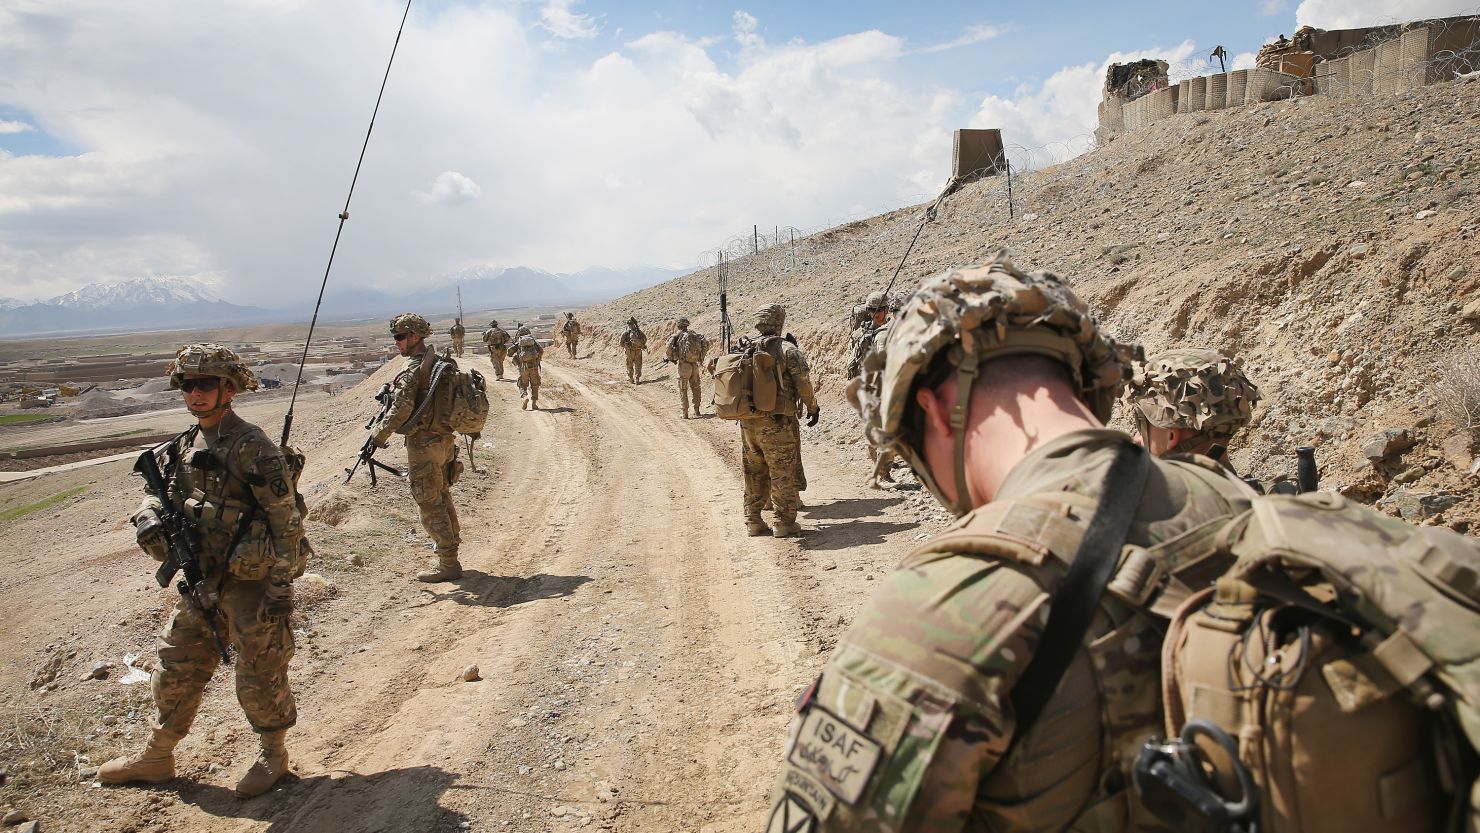 The war in Afghanistan is the longest-running US conflict.